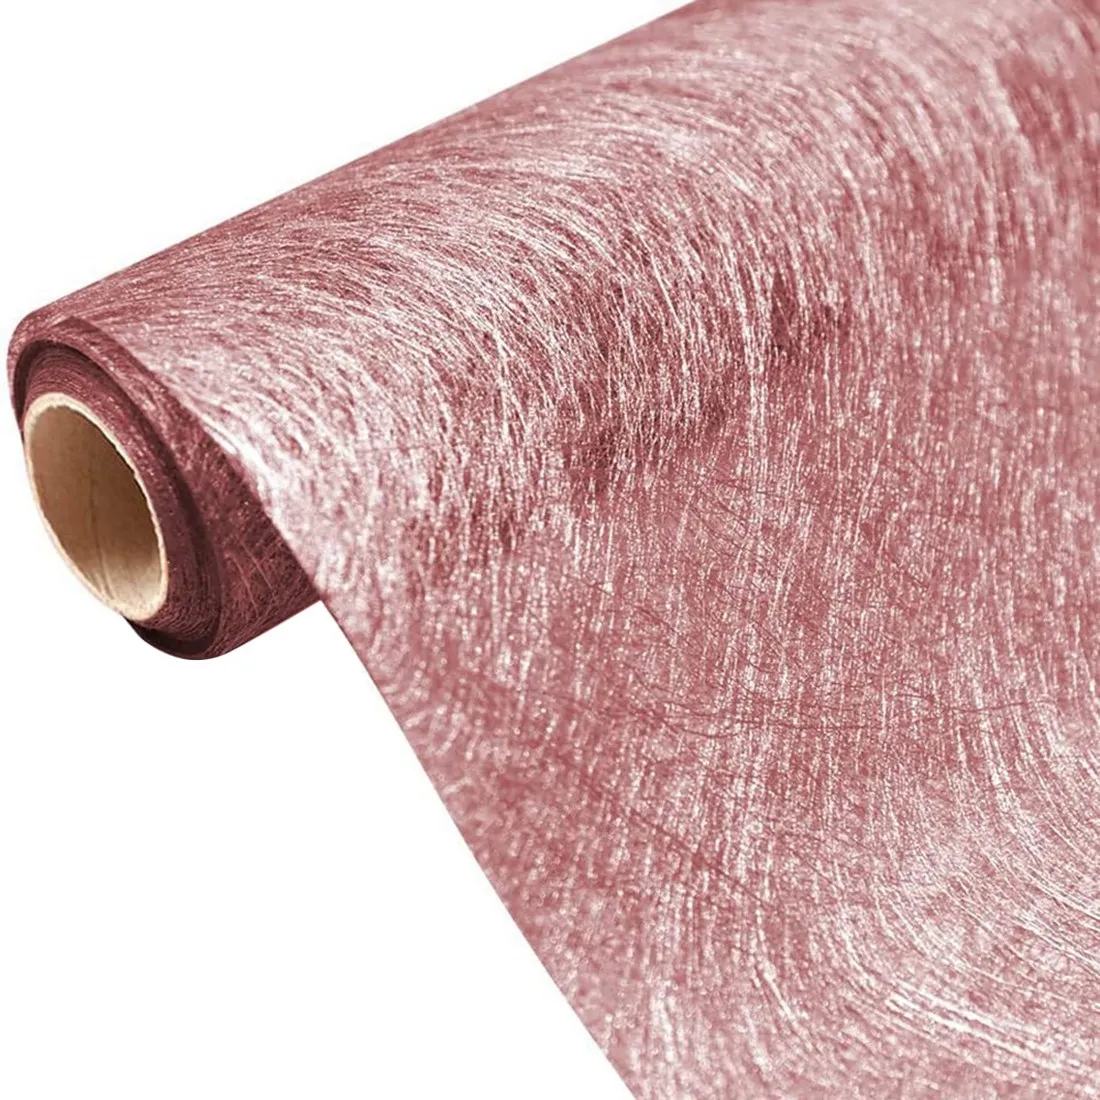 

Rose Gold Table Runner Metallic Fiber Non-Woven Fabric for Wedding Party Table Decoration Gift Floral Wrapping,30cmx10M